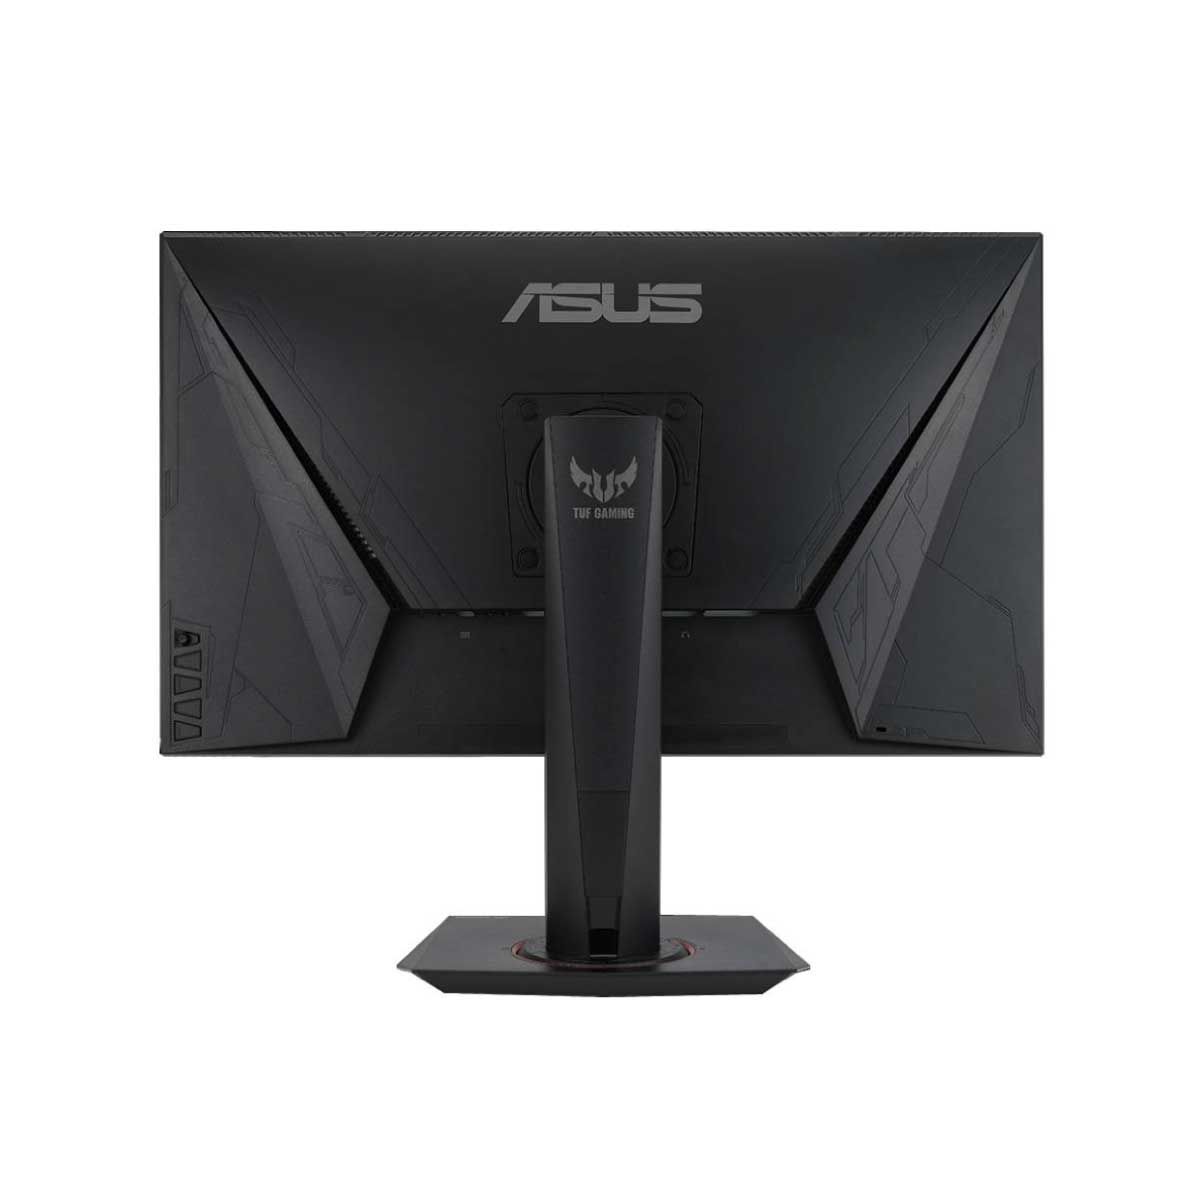 MONITOR (จอมอนิเตอร์) ASUS TUF GAMING VG279QM - 27" IPS FHD 280Hz G-SYNC COMPATIBLE